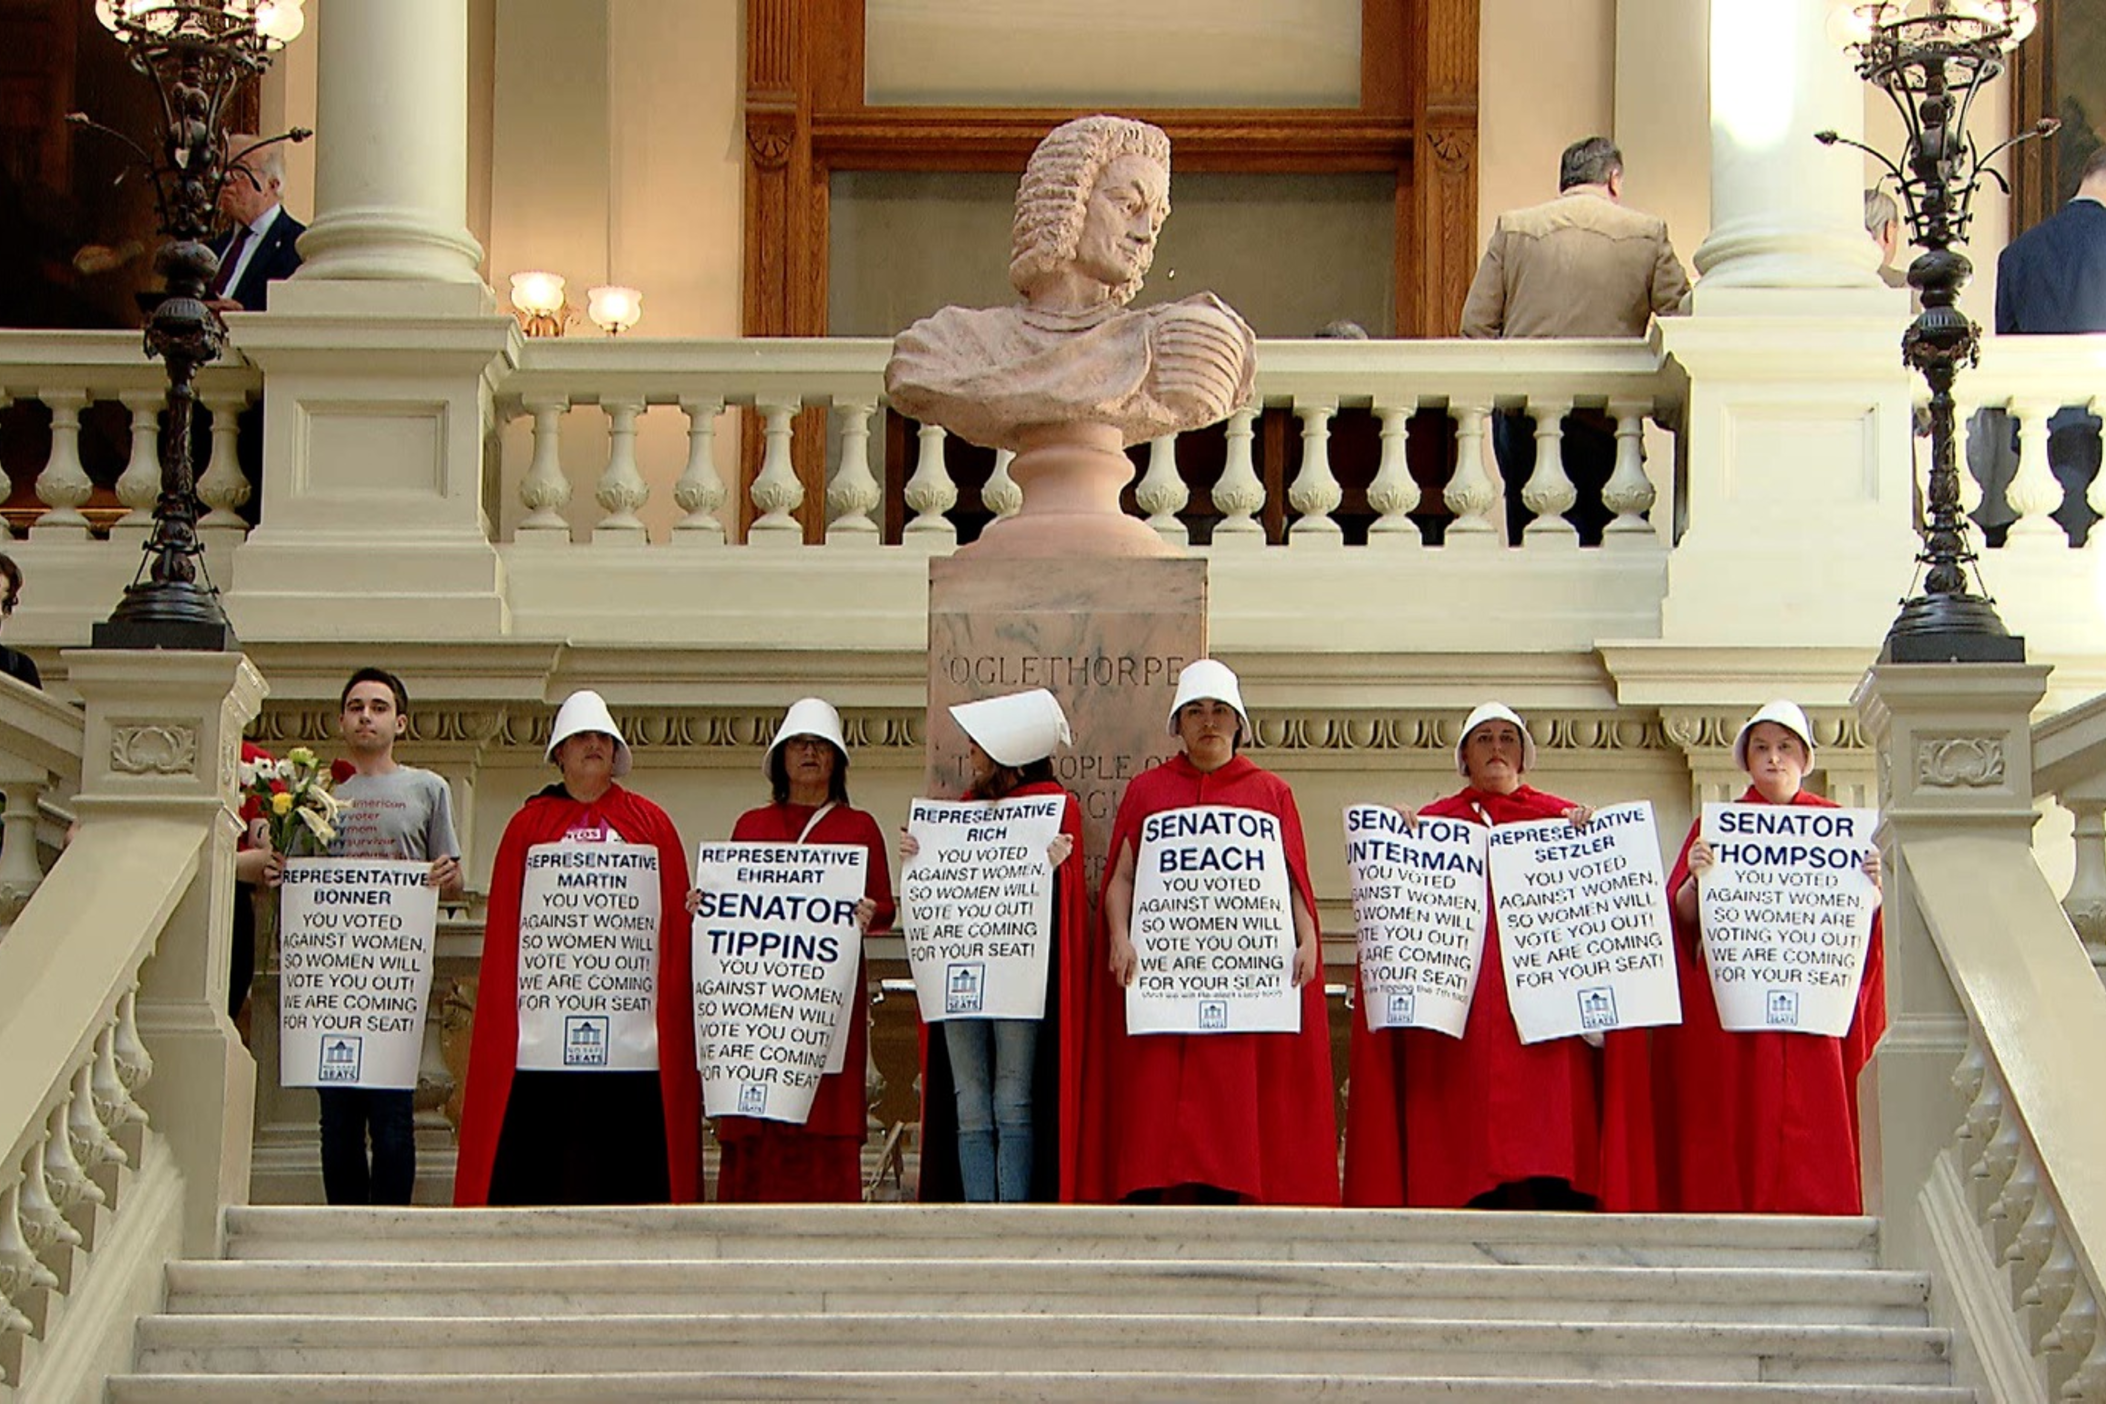 In costumes reminiscent of the TV show "The Handmaid's Tale," a group protests Georgia’s restrictive anti-abortion bill, HB 481, at the Georgia Capitol in April 2019. 